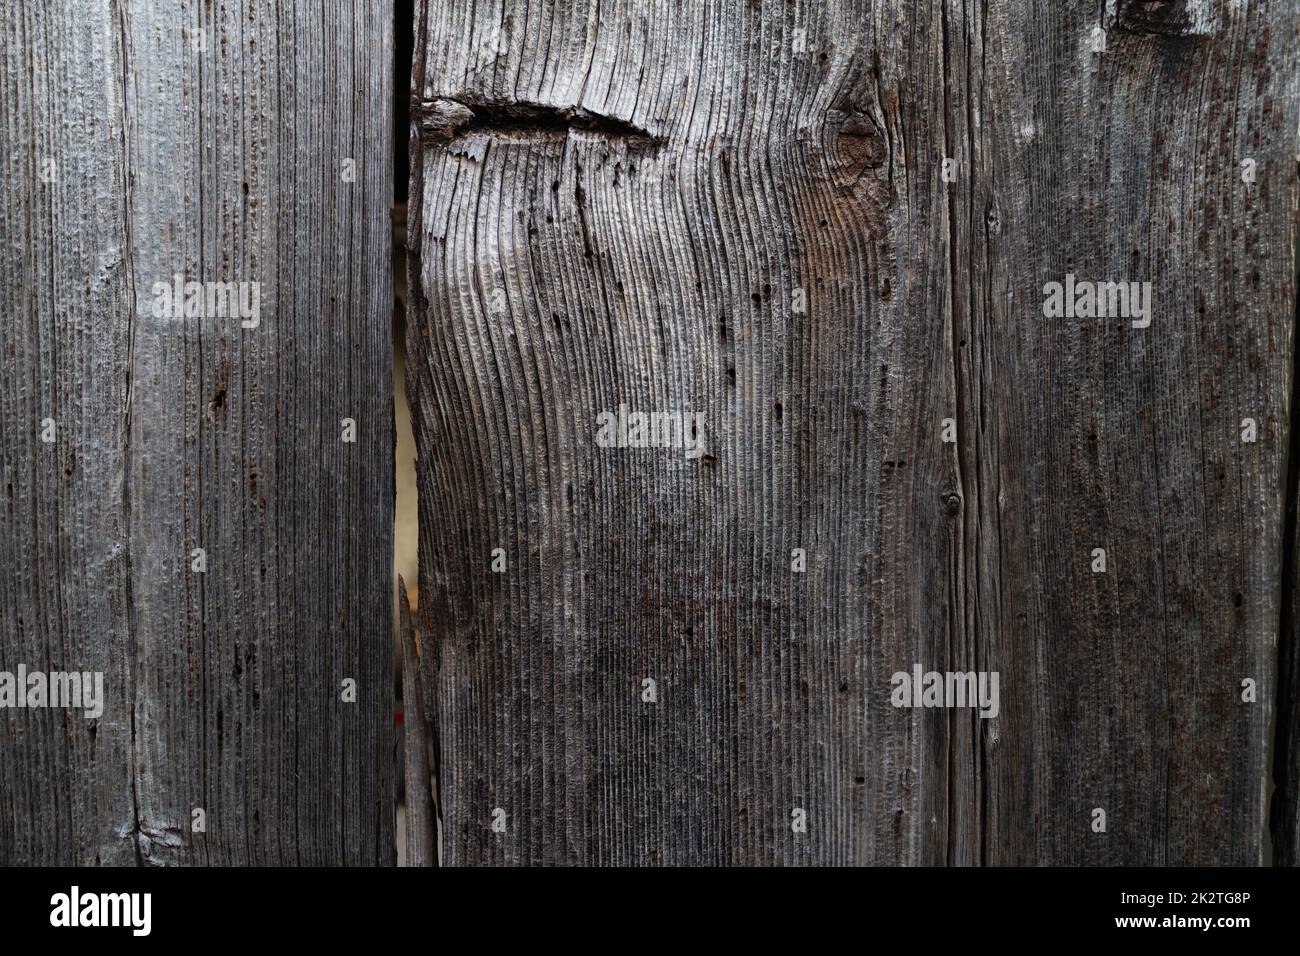 photo of wood texture aged for more than 30 years abroad, Italy Stock Photo